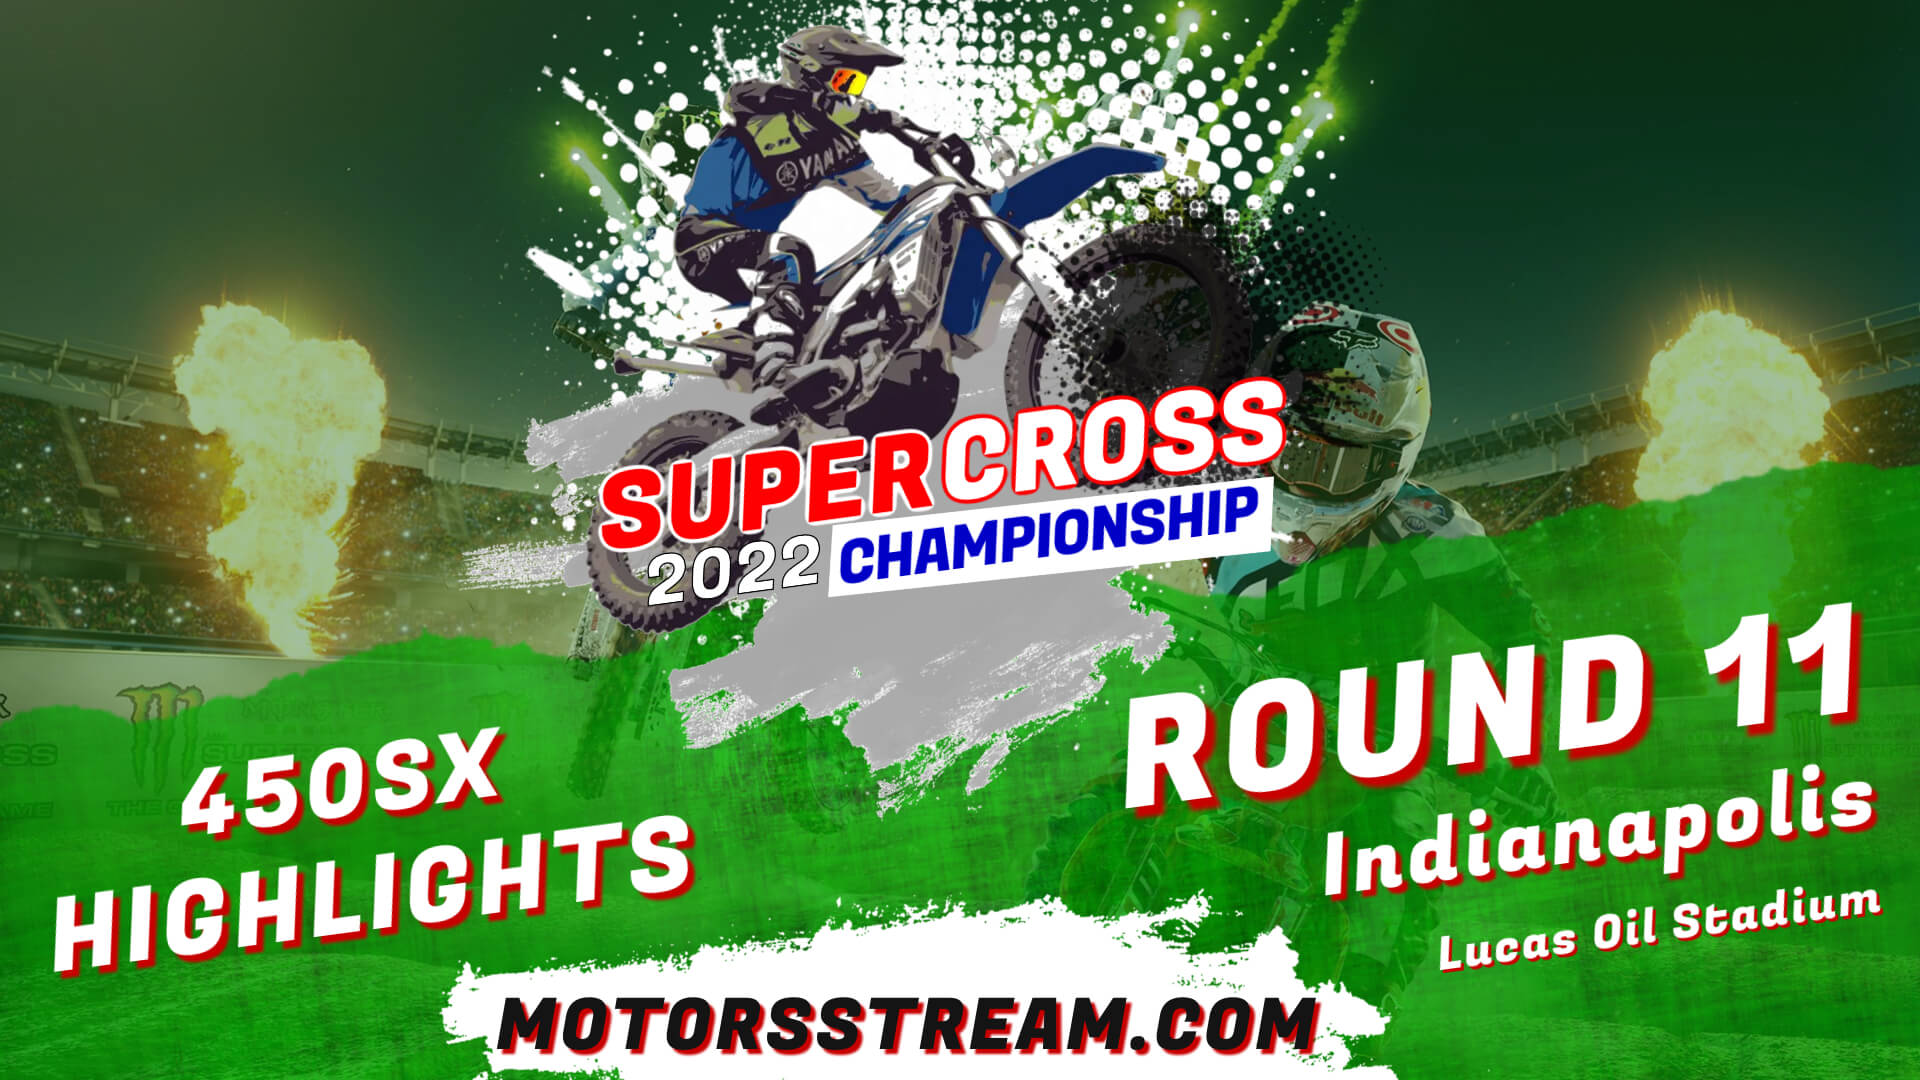 Supercross Round 11 Indianapolis 450SX Highlights 2022